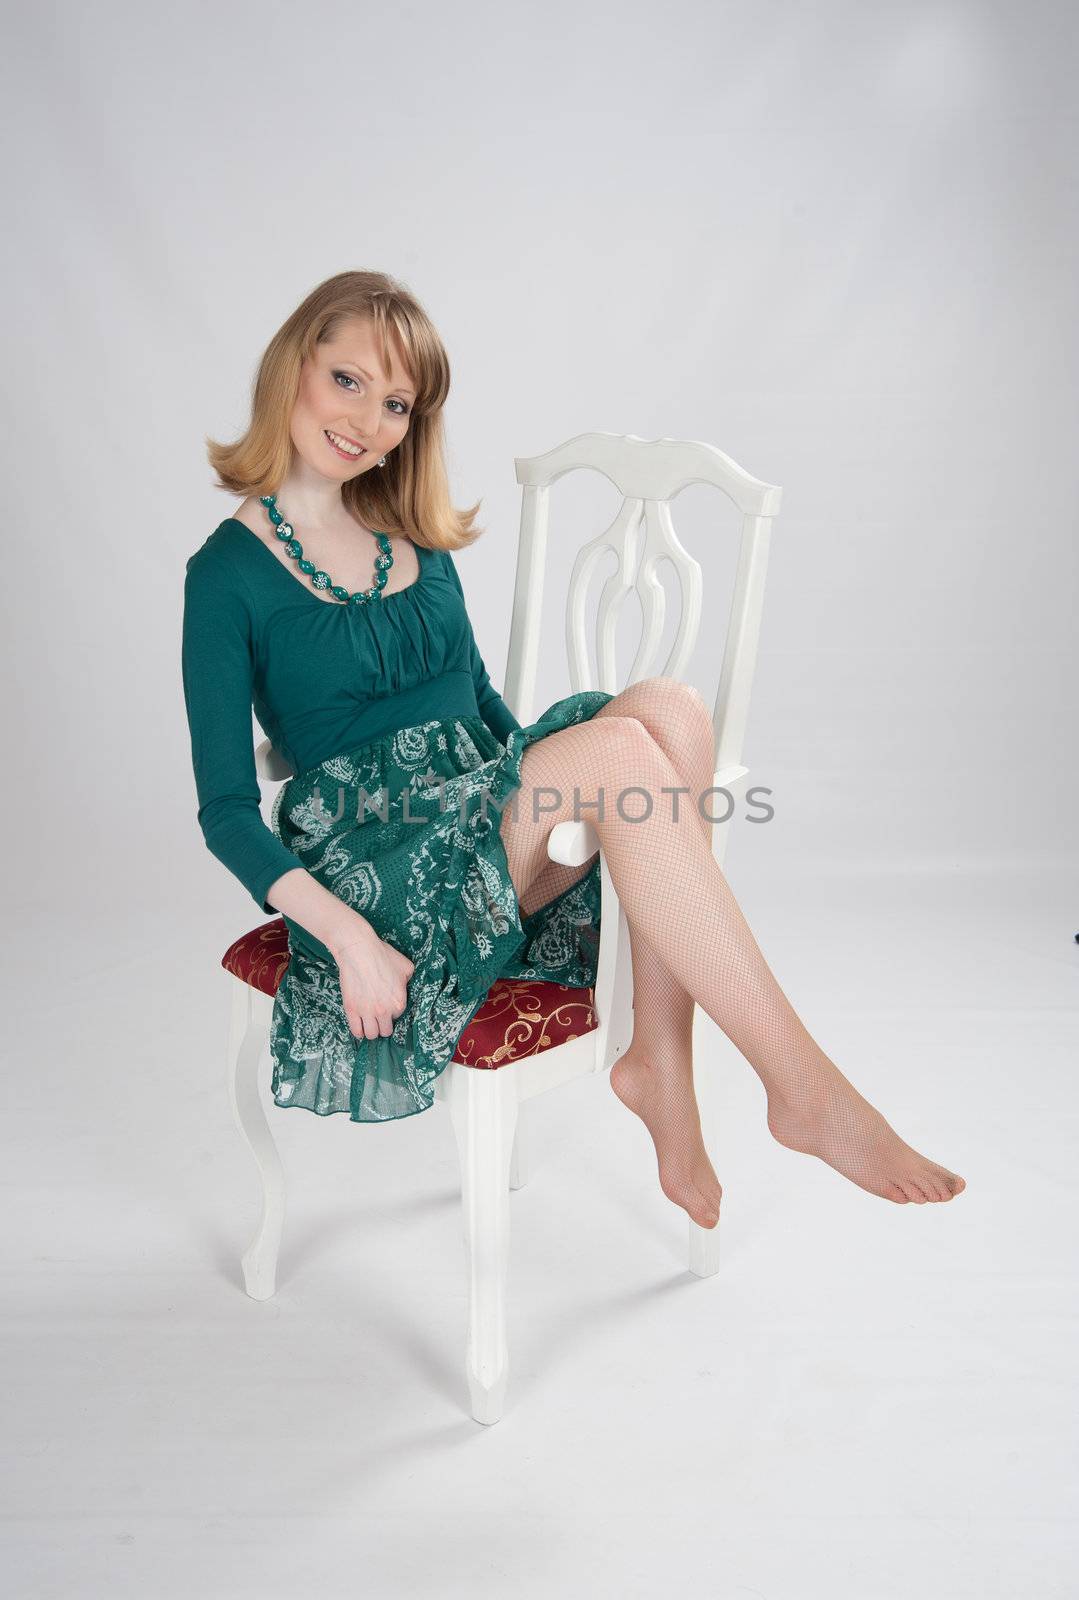 beautiful woman in a green dress sitting on a chair